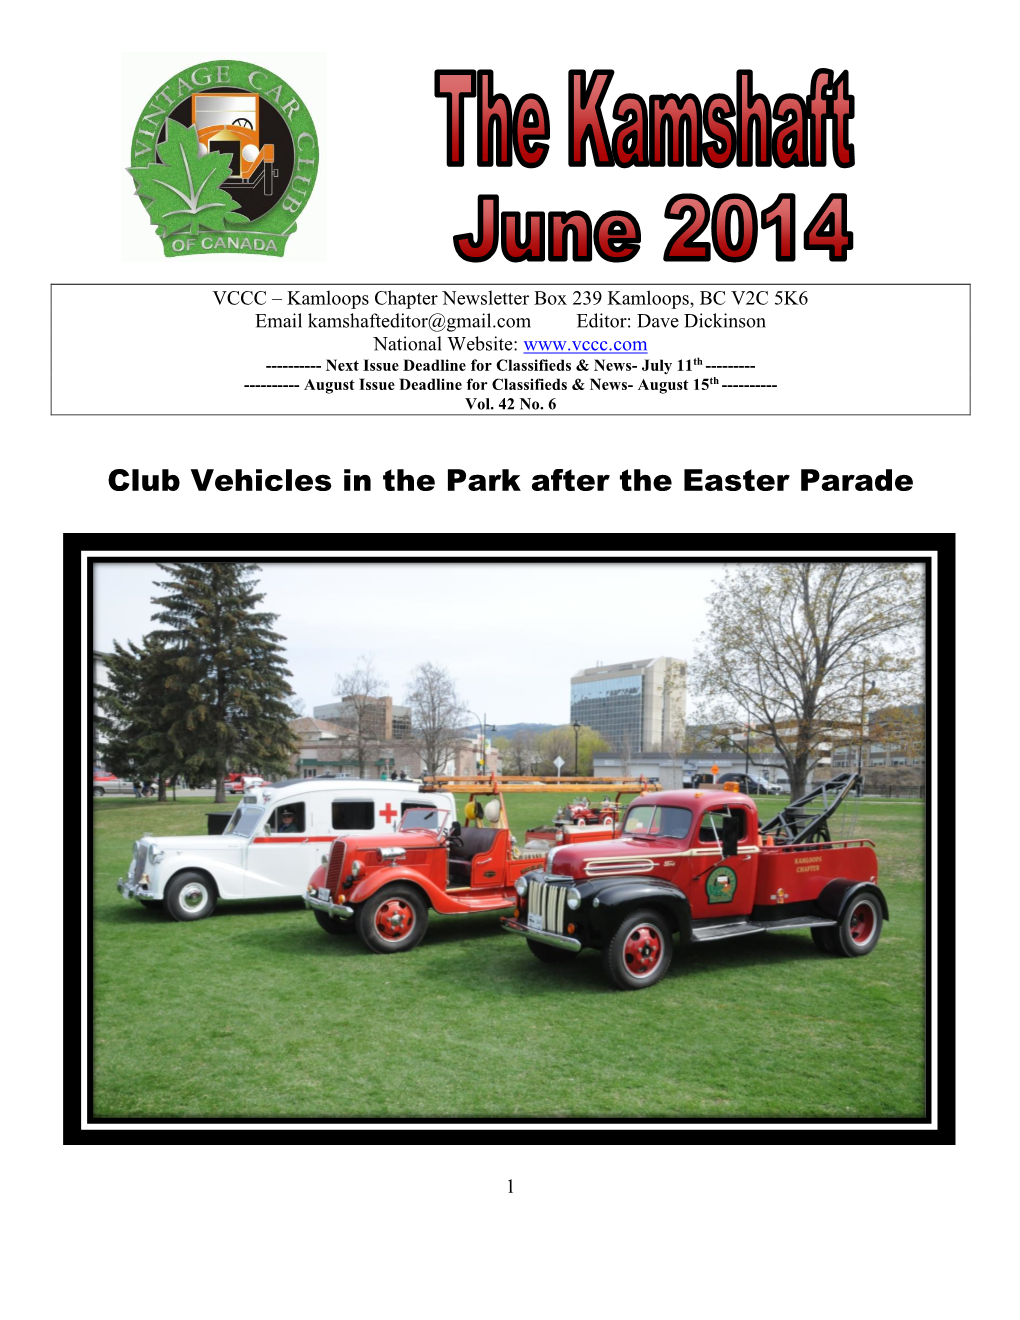 Club Vehicles in the Park After the Easter Parade